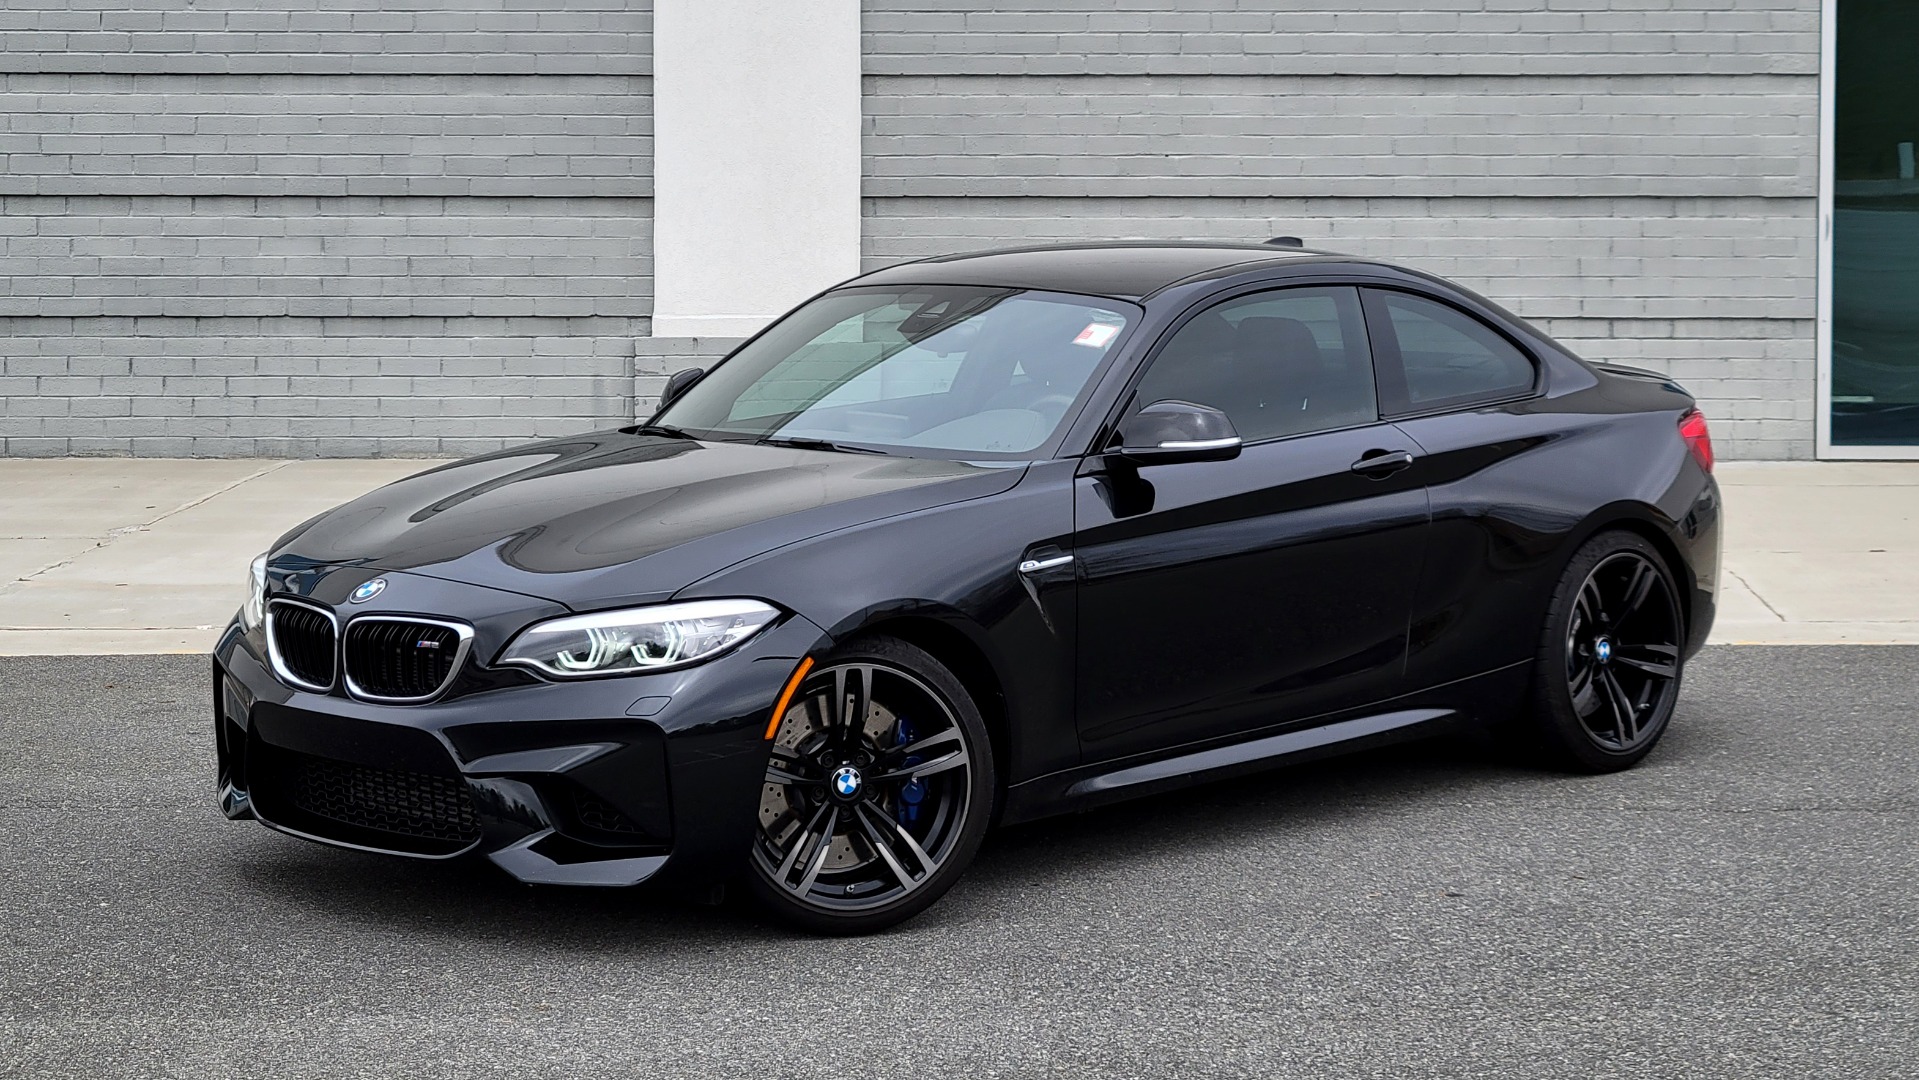 Used 2018 BMW M2 COUPE W/EXECUTIVE PKG / WIFI / H/K SND / PARK ASST / REARVIEW for sale Sold at Formula Imports in Charlotte NC 28227 6